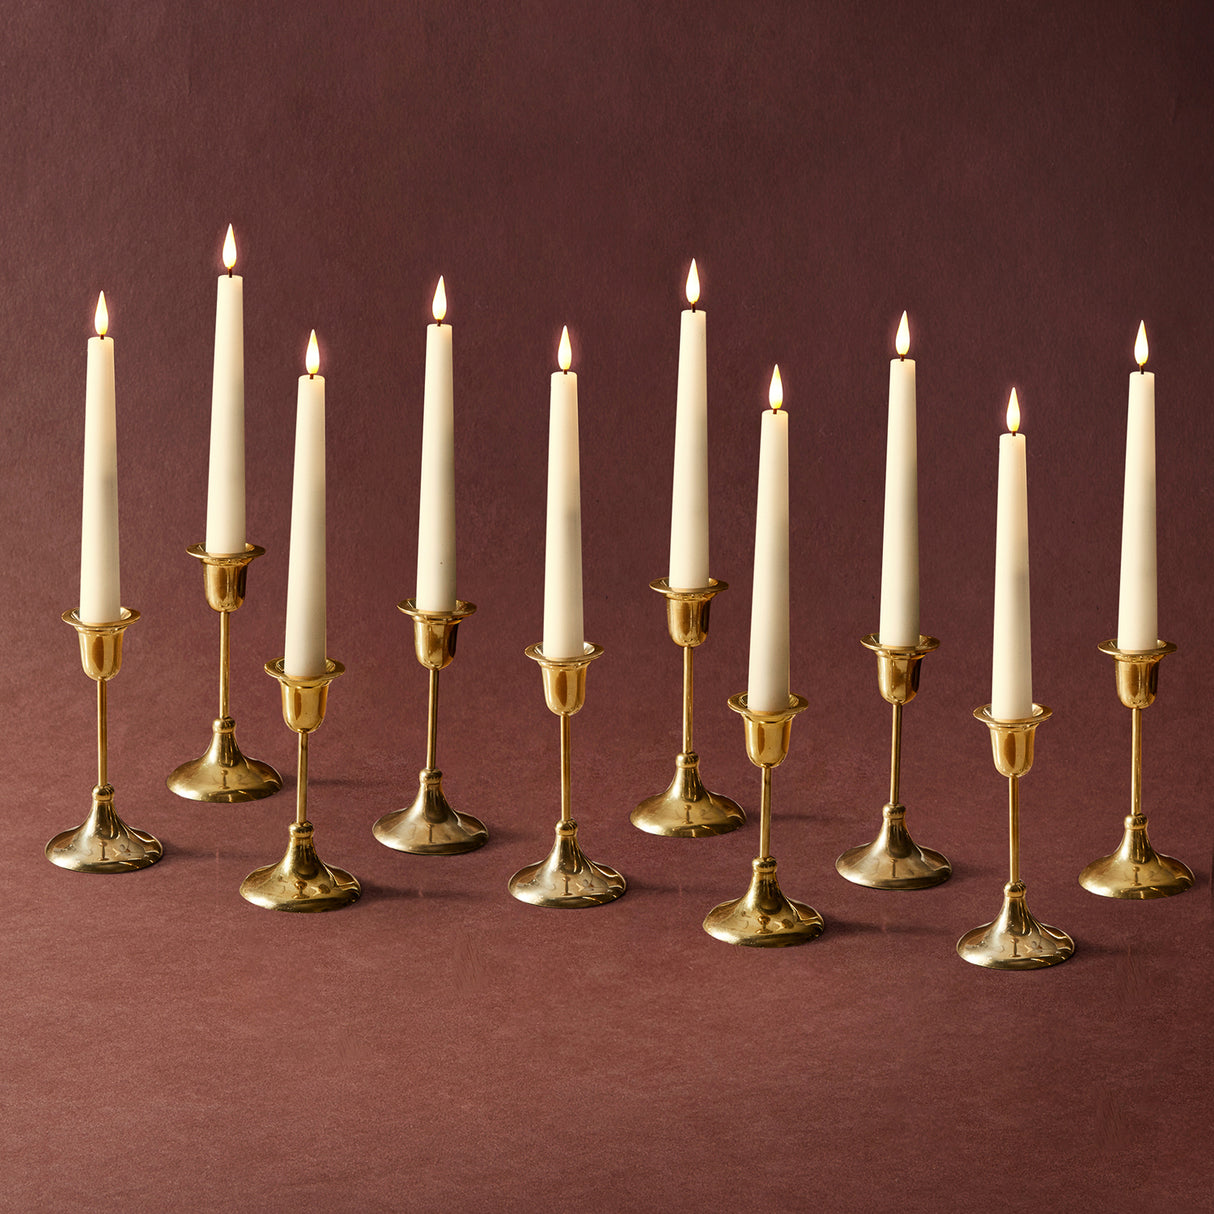 Infinity Wick Ivory 7" Taper Candles Set of 10